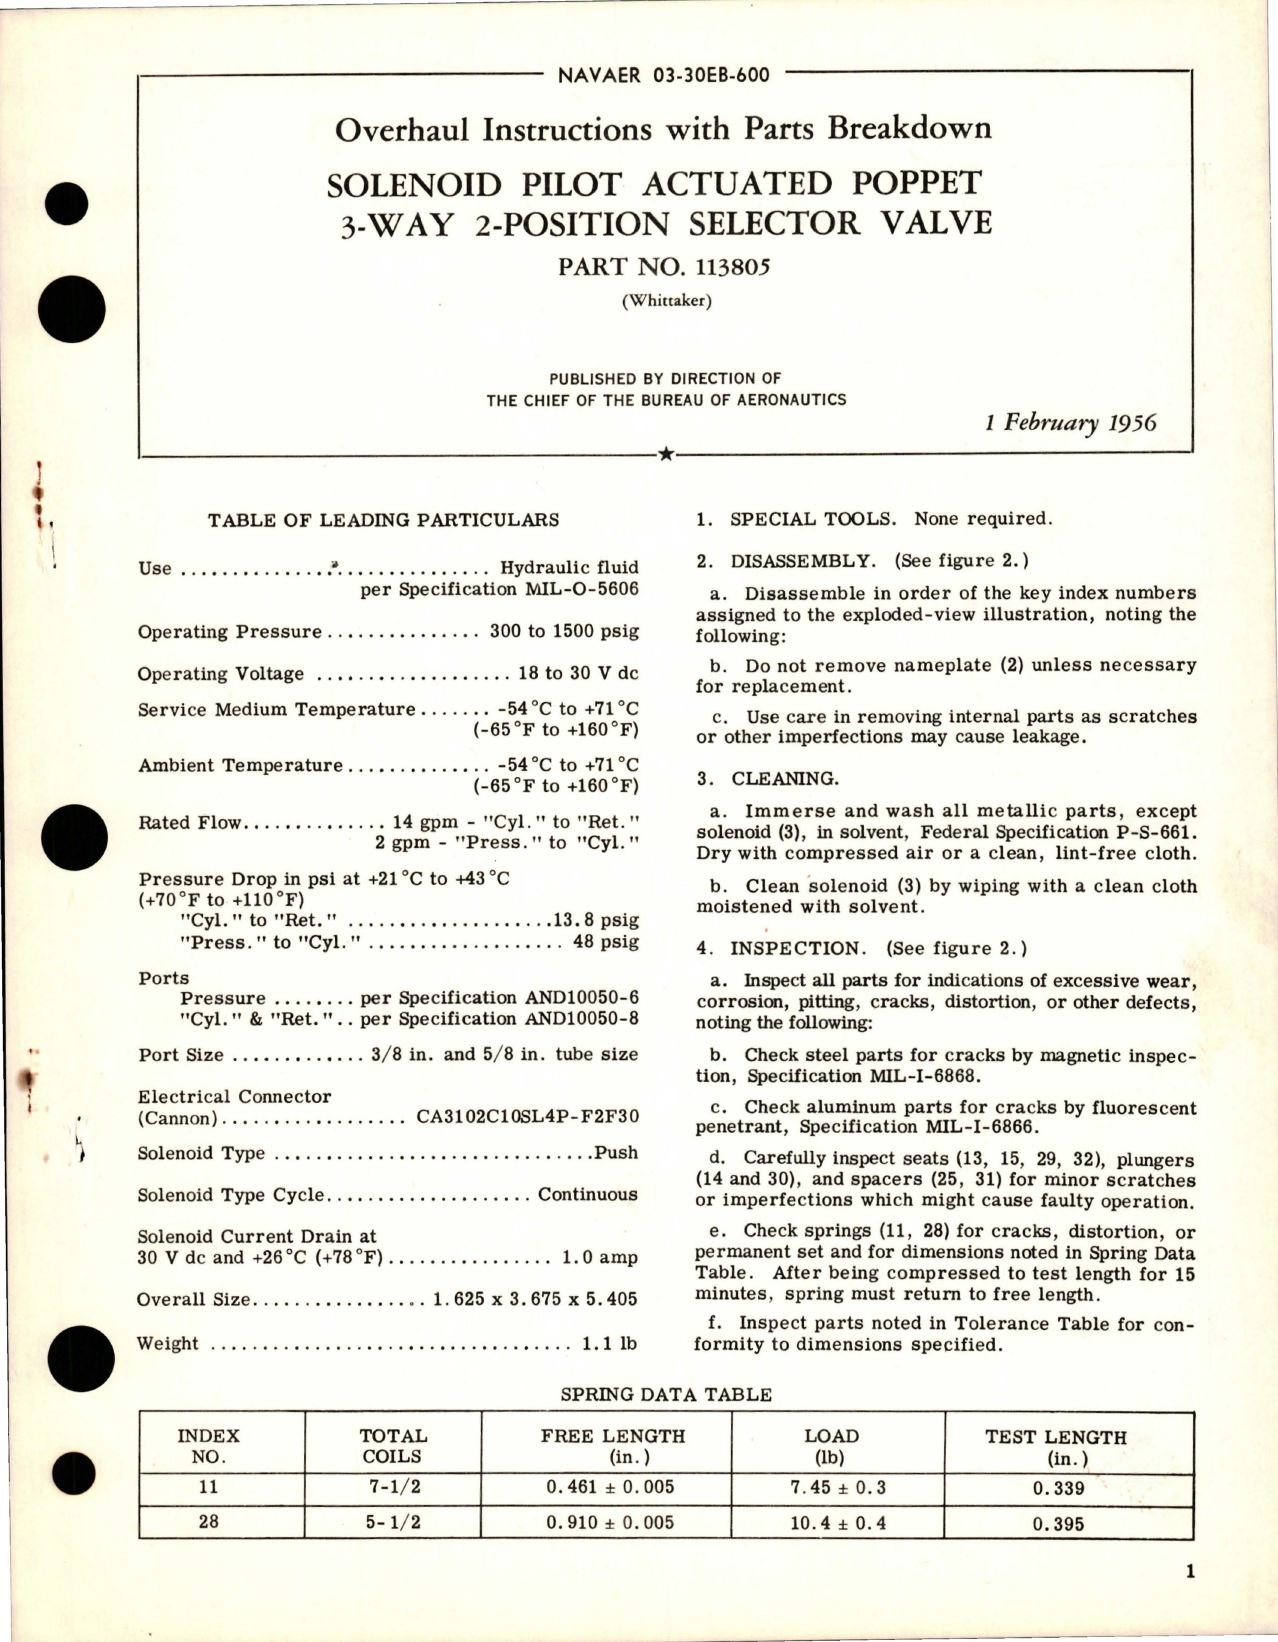 Sample page 1 from AirCorps Library document: Overhaul Instructions with Parts for Solenoid Pilot Actuated Poppet 3 Way 2 Position Selector Valve - Part 113805